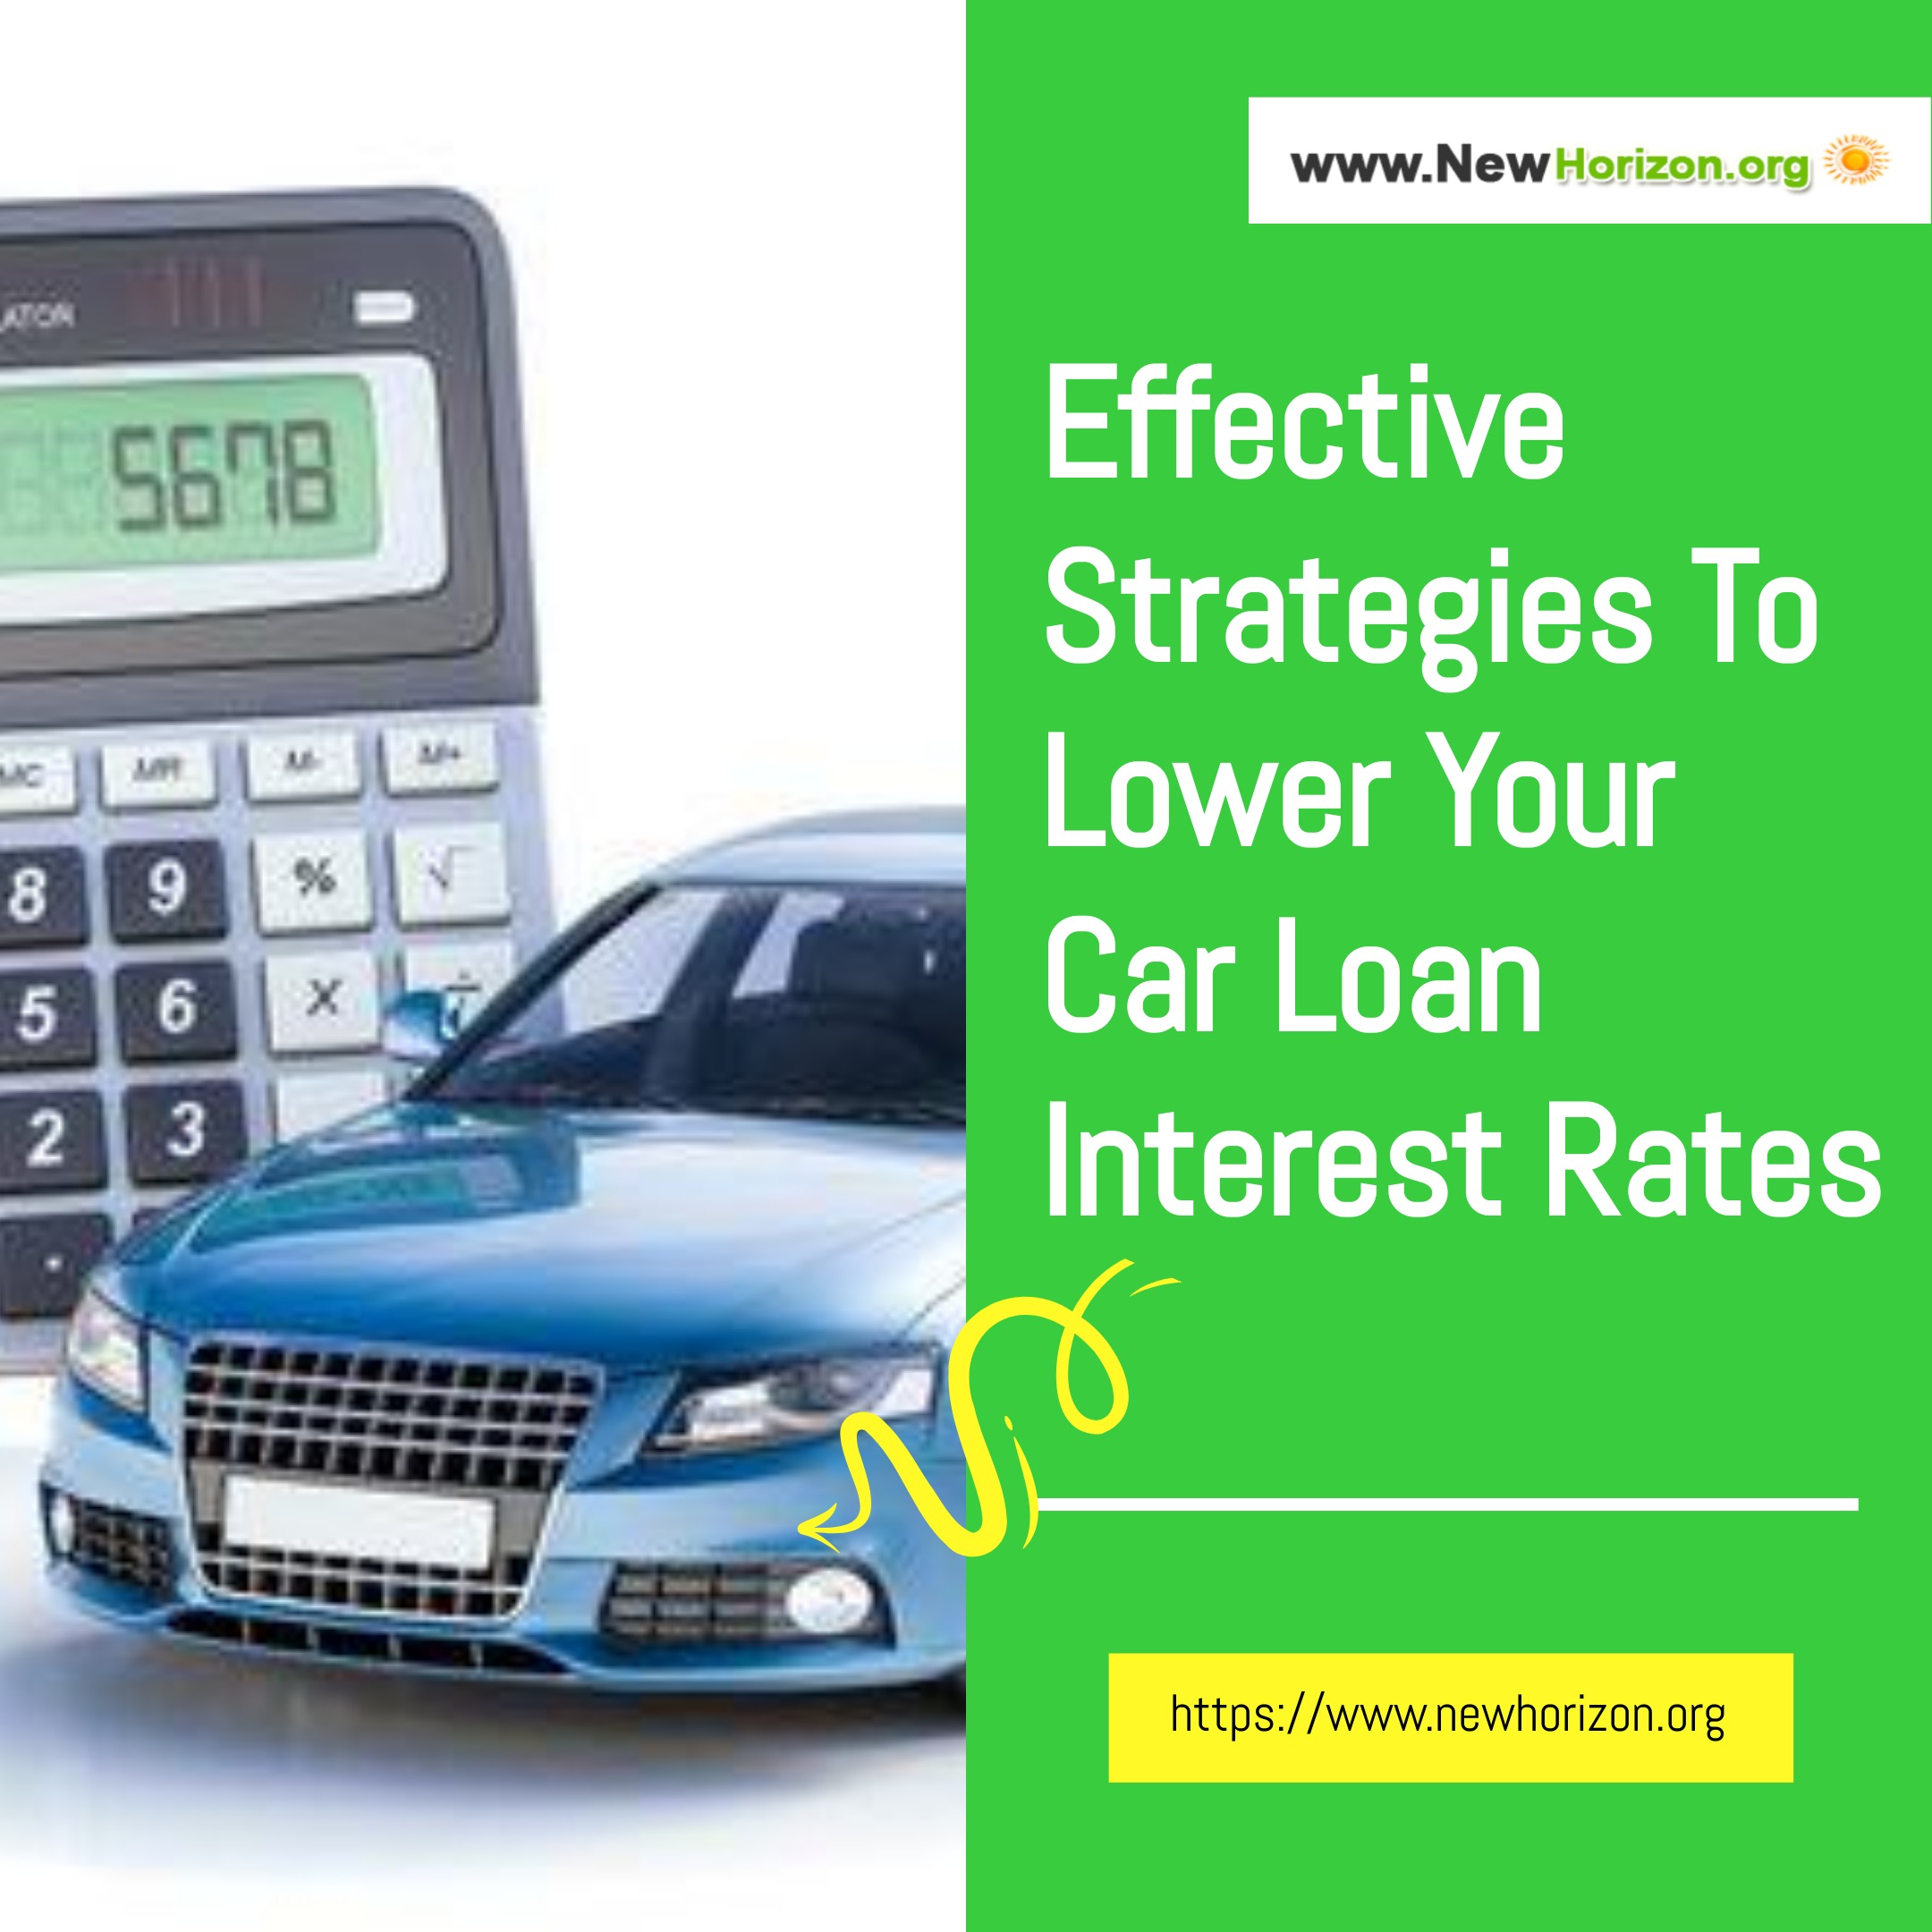 Effective Strategies To Lower Your Car Loan Interest Rates